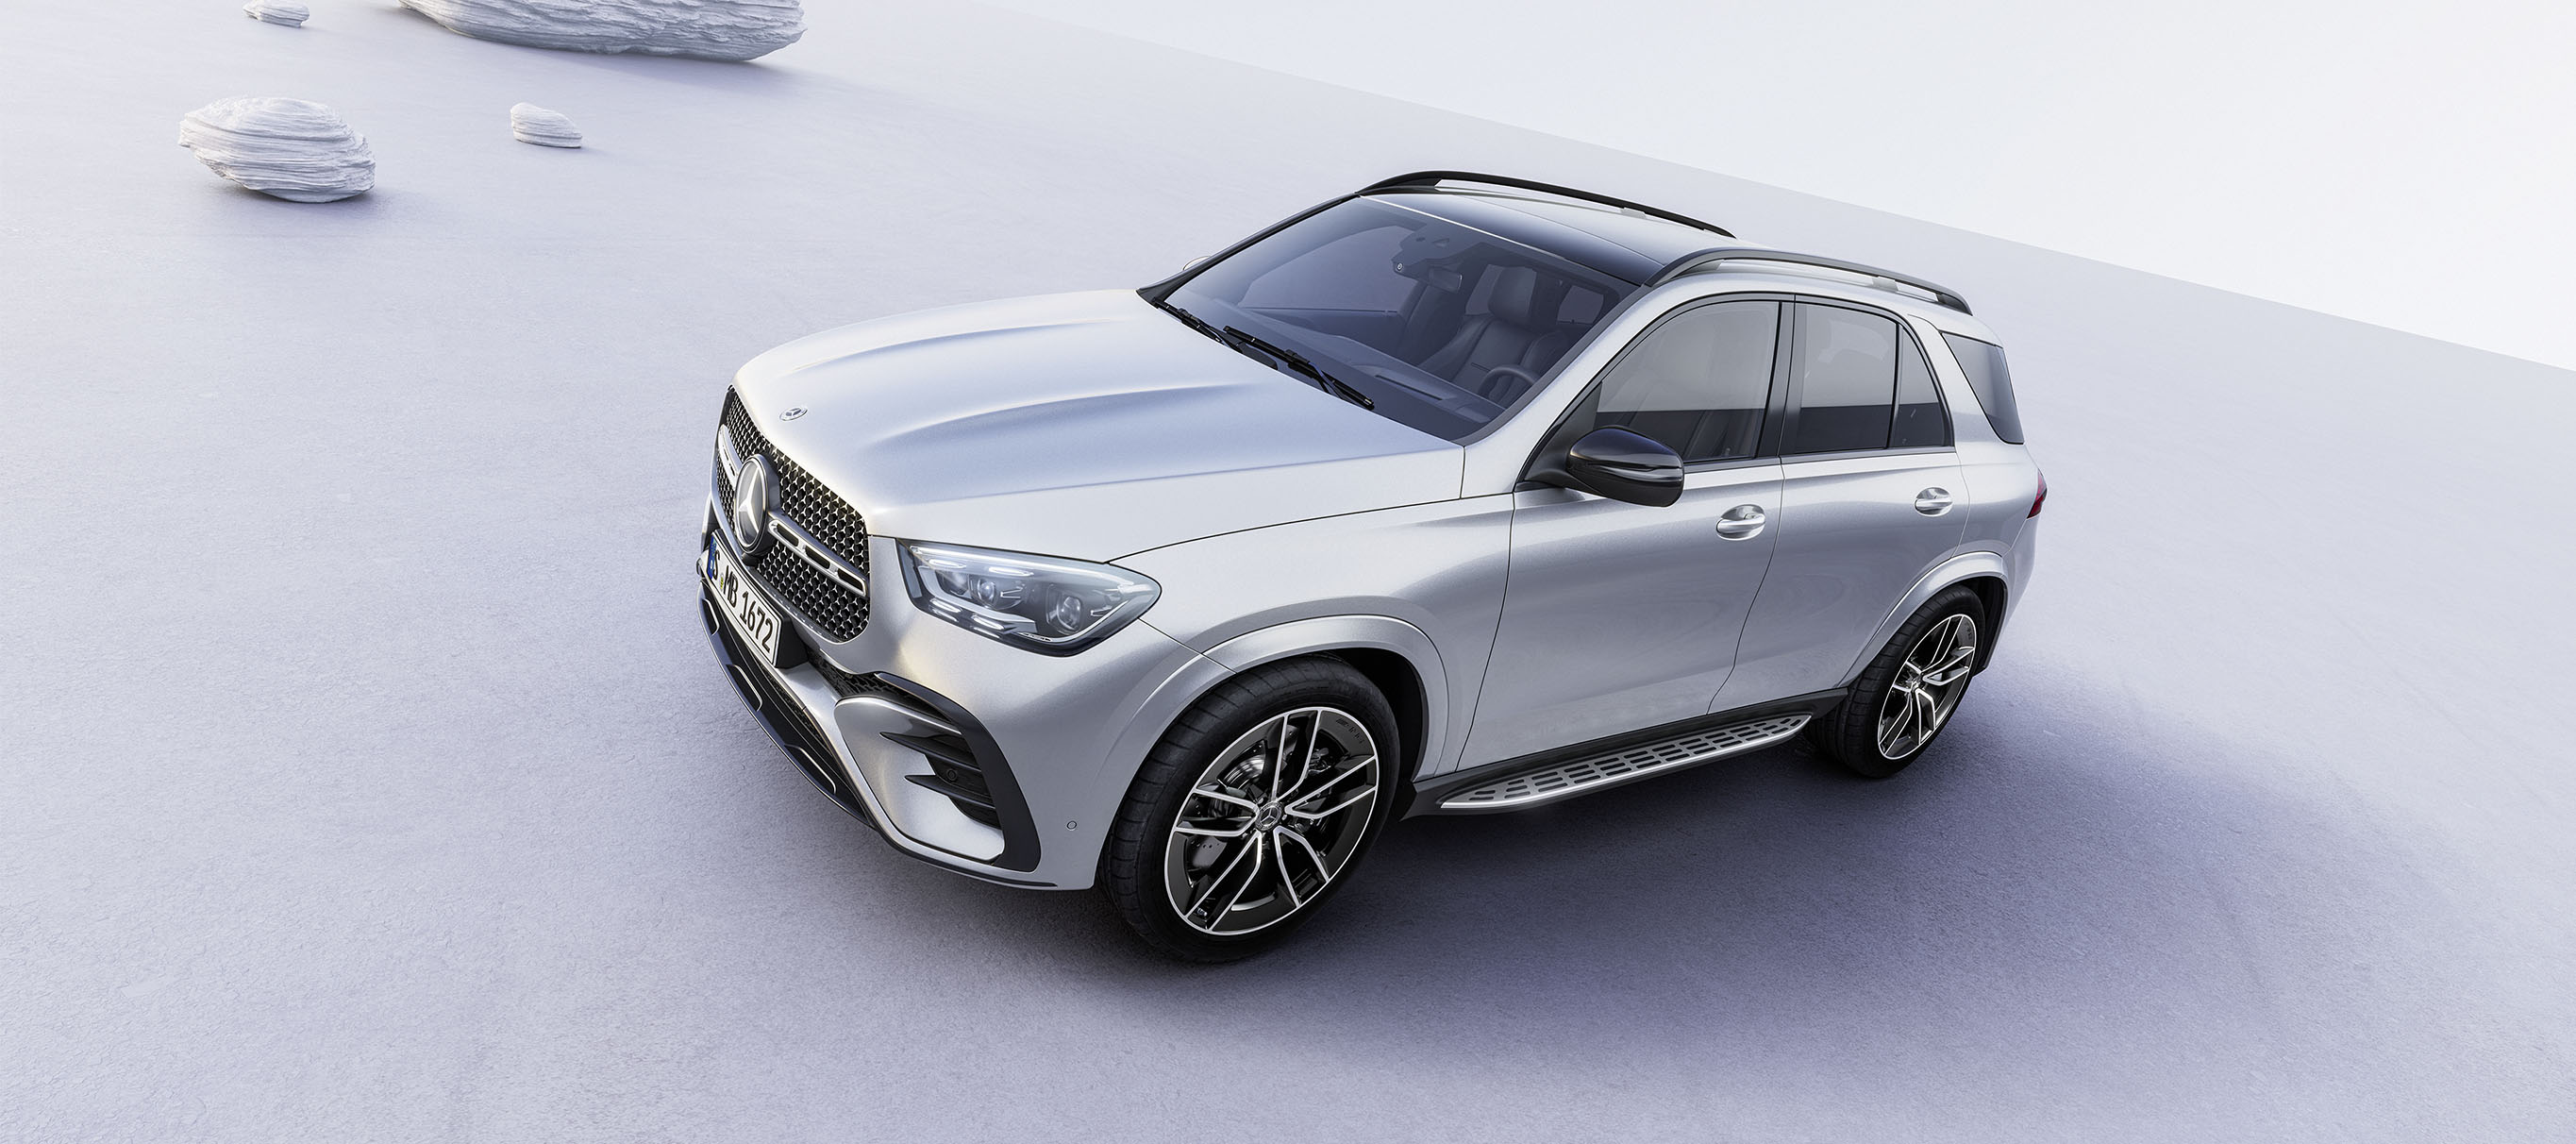 The new GLE